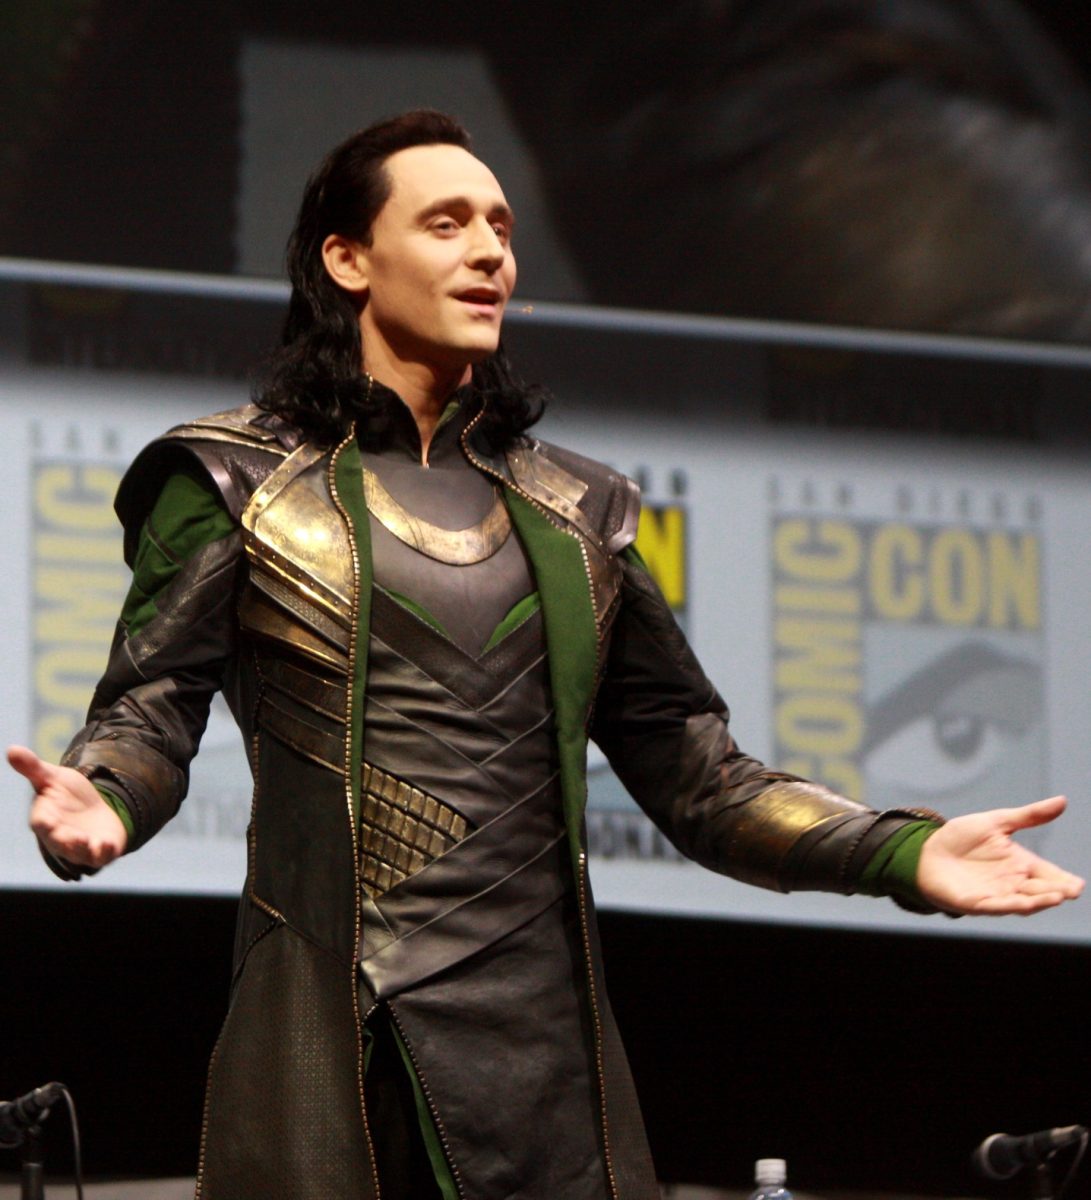 Tom Hiddleston as his character, Loki, at the San Diego Comic Con. The second season of the show Loki, on Disney Plus, has been a hit since its release.